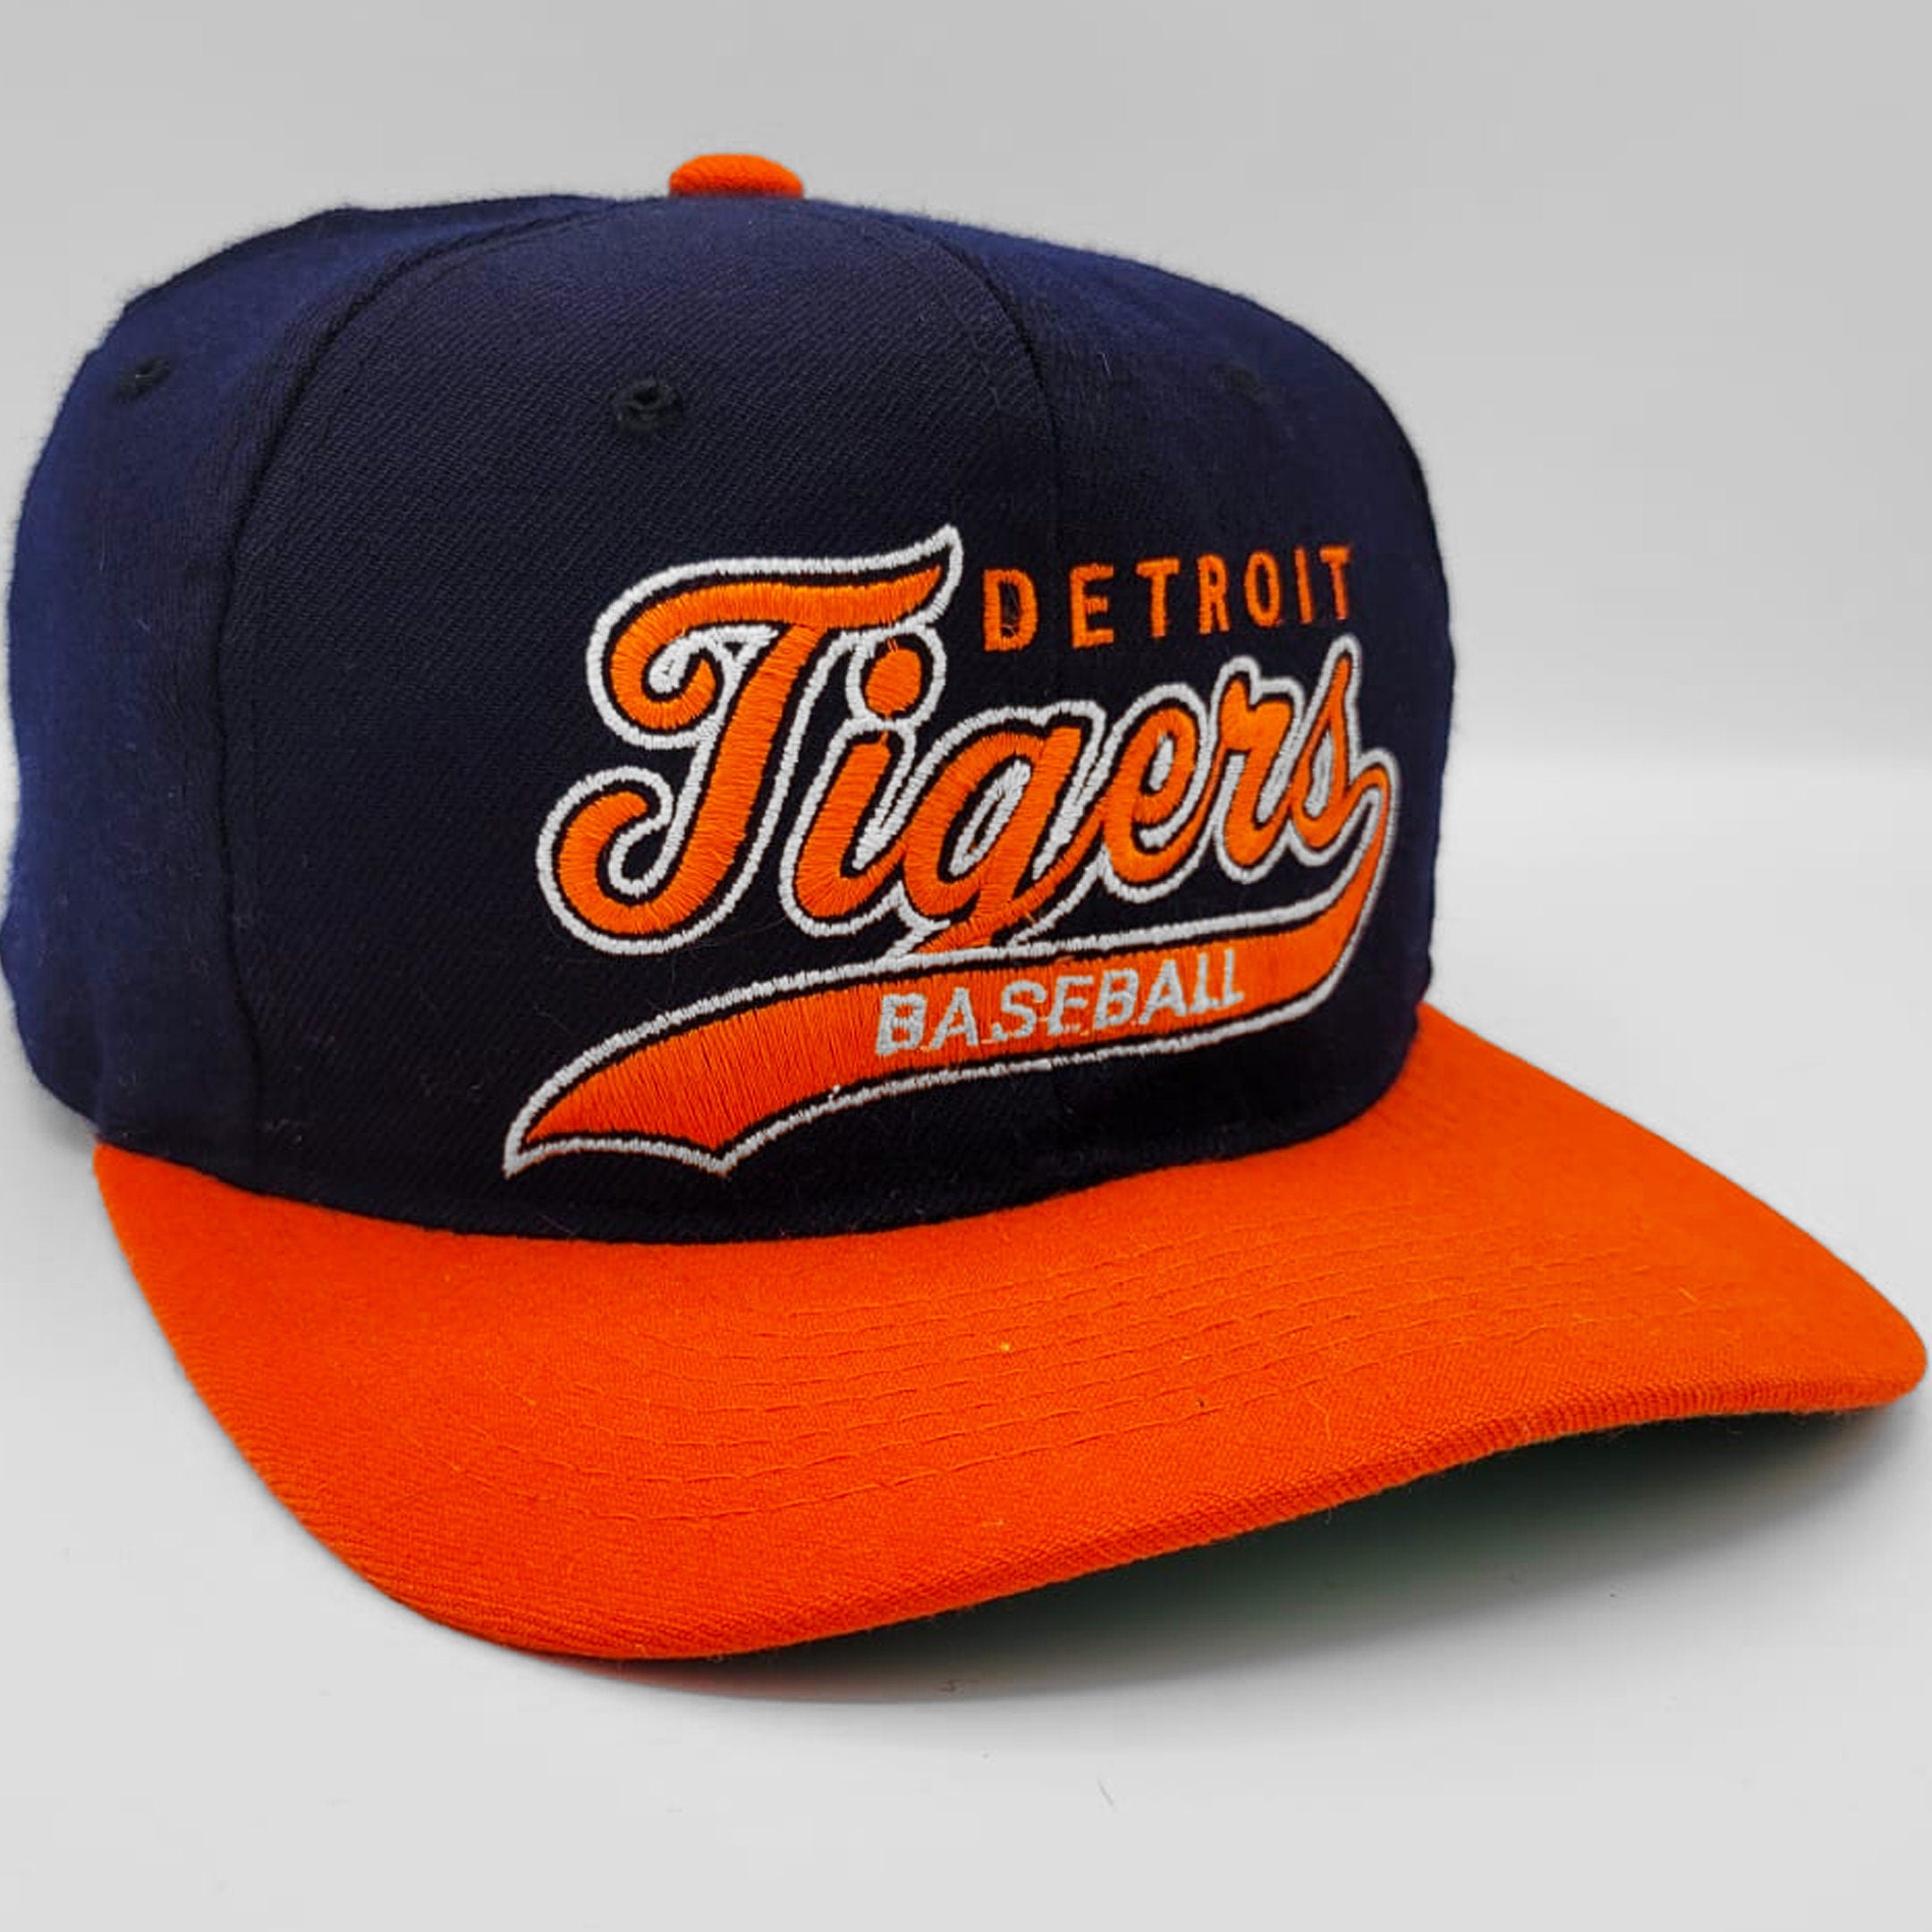 Vintage 1990s MLB Detroit Tigers Snapback Hat NWT Twins Brand Youth